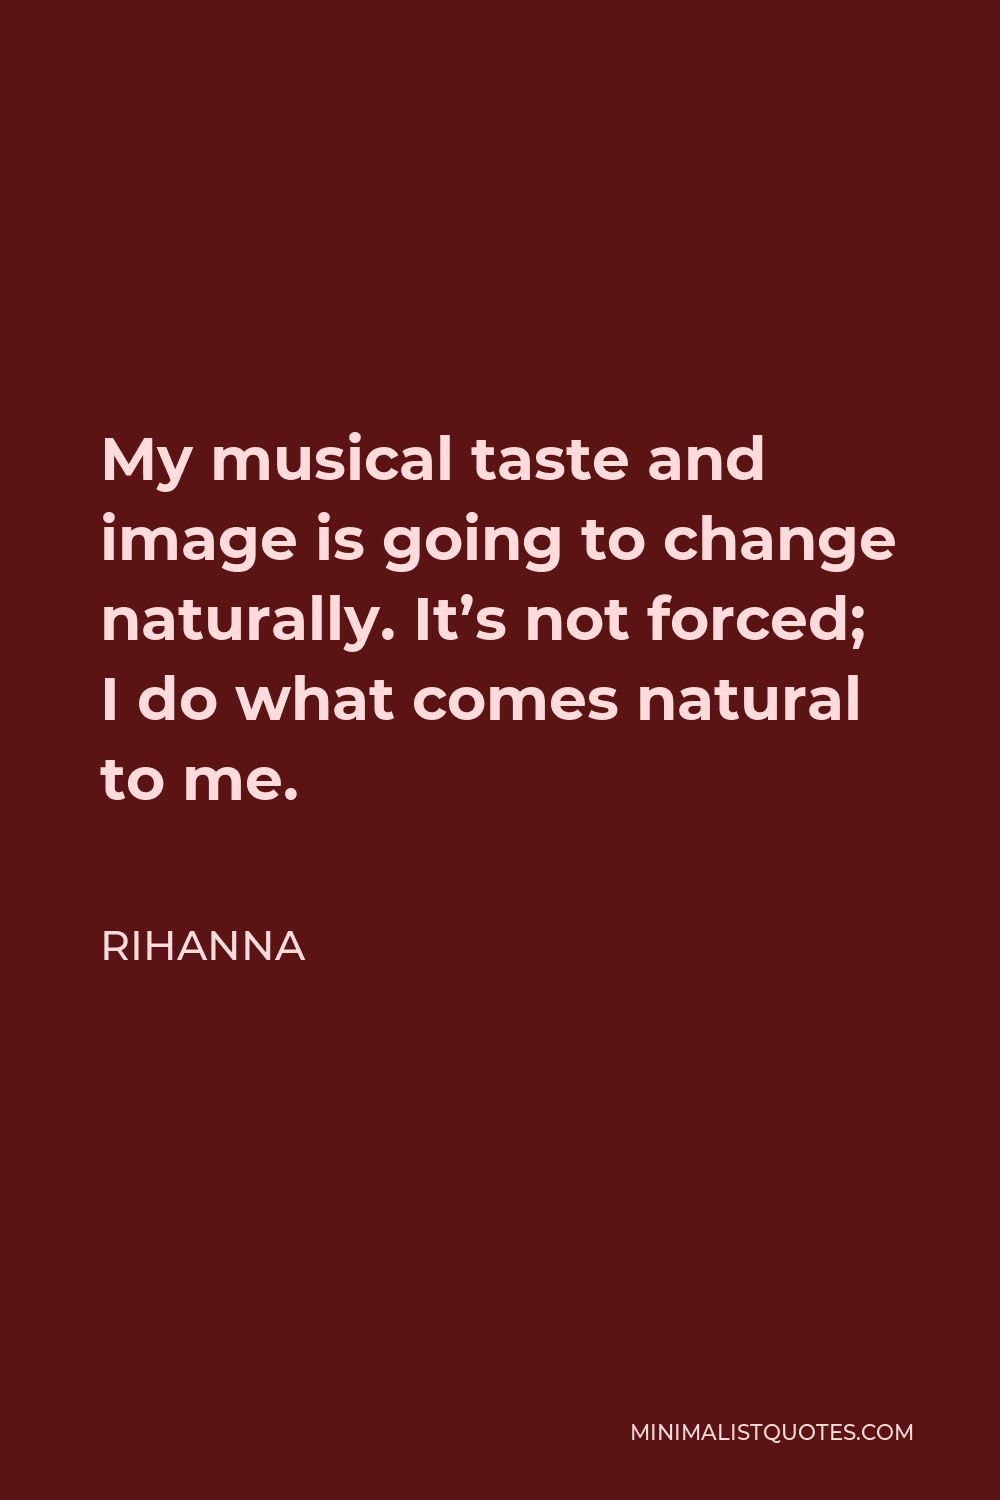 Rihanna Quote - My musical taste and image is going to change naturally. It’s not forced; I do what comes natural to me.